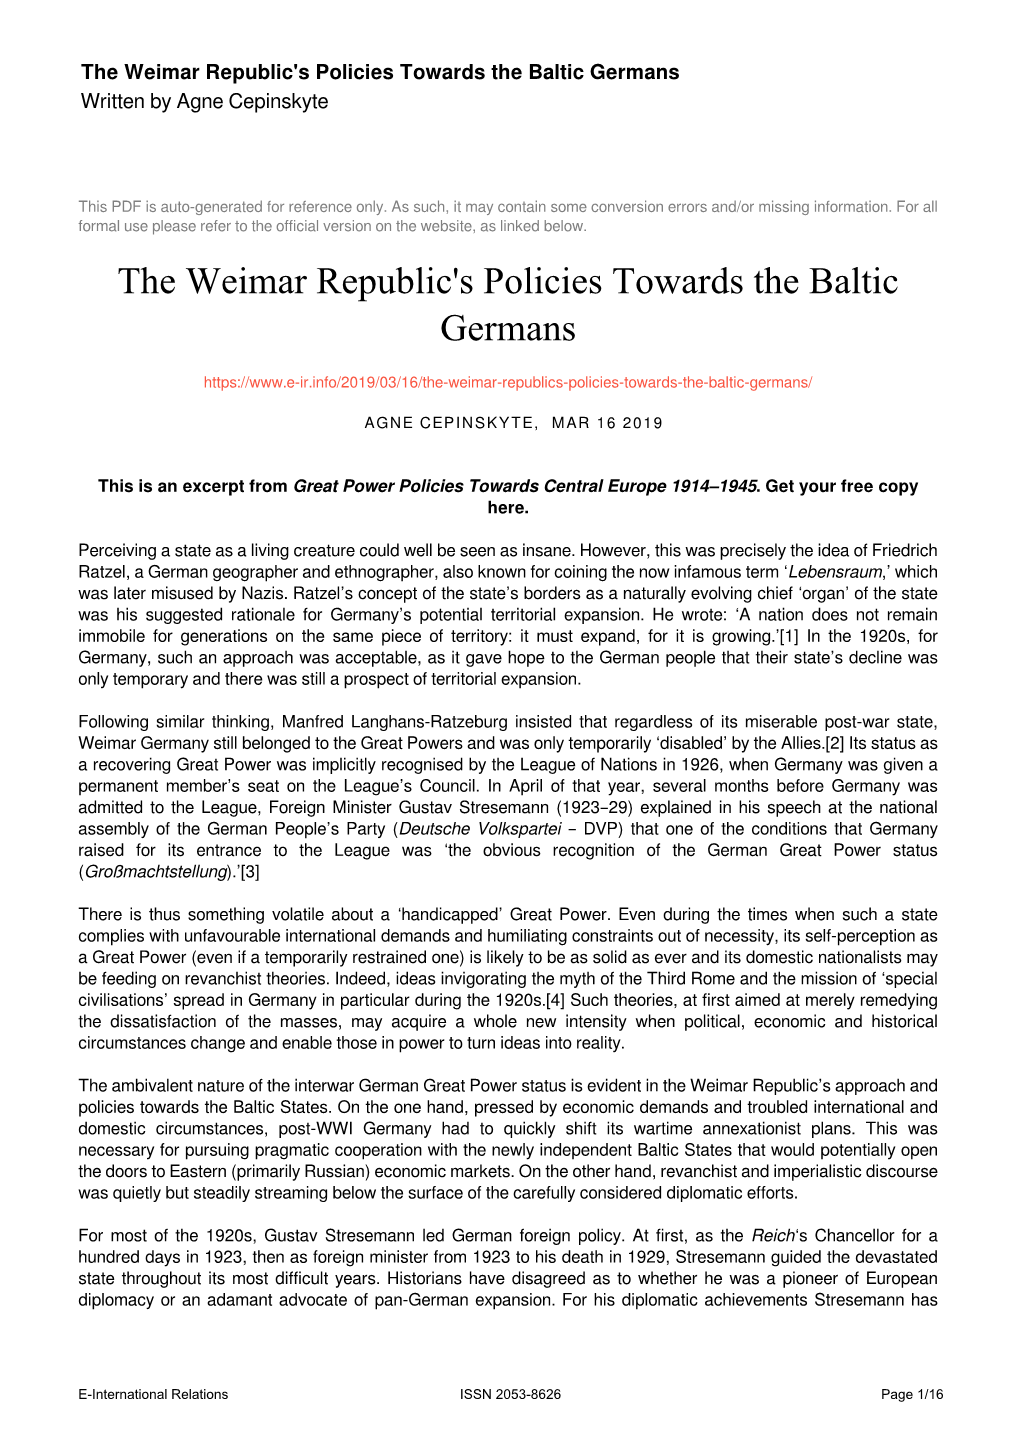 The Weimar Republic's Policies Towards the Baltic Germans Written by Agne Cepinskyte